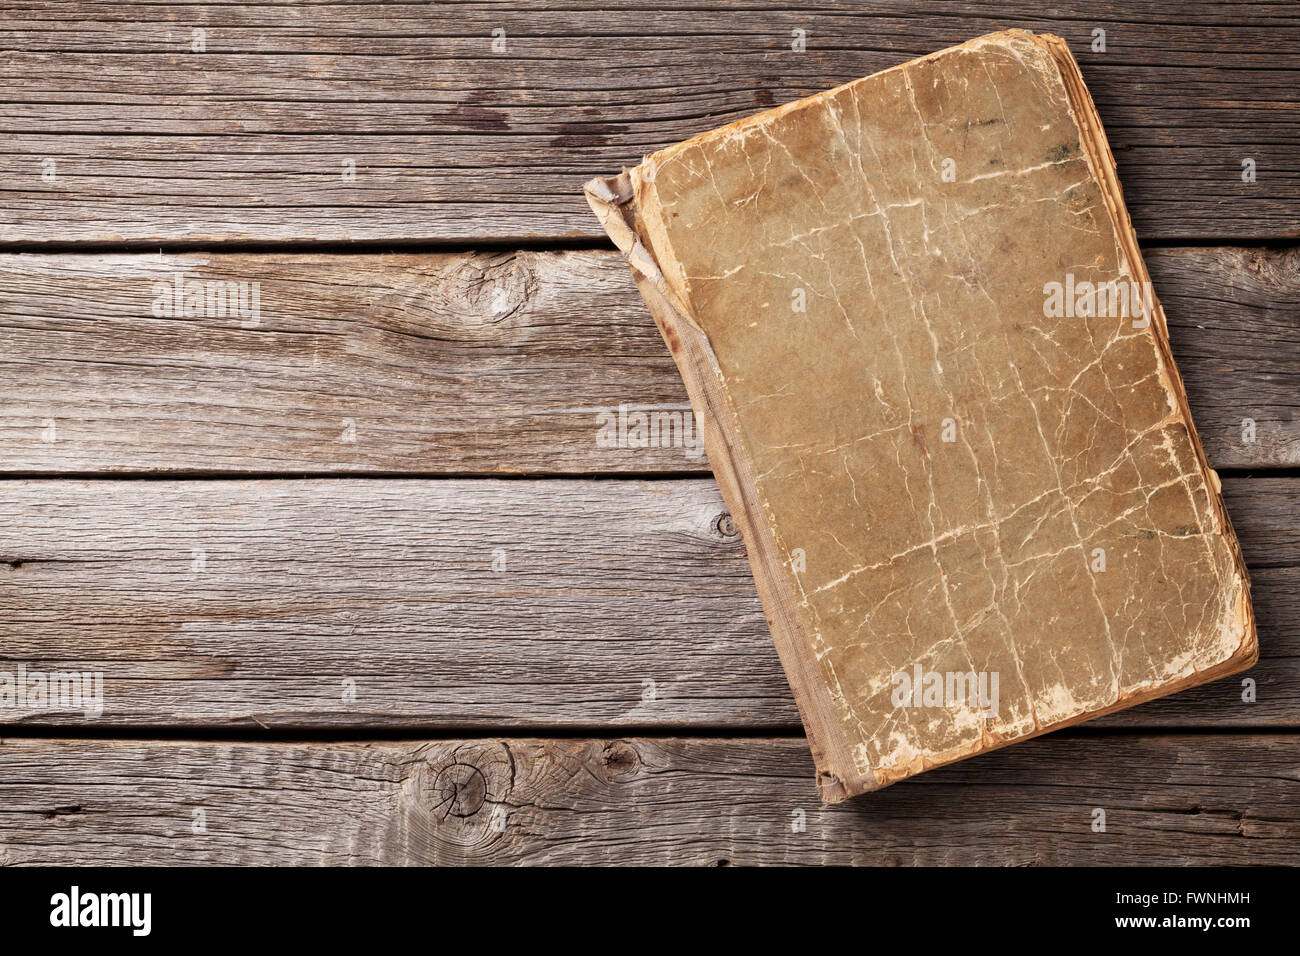 Vintage book on wooden background. Top view with copy space Stock Photo